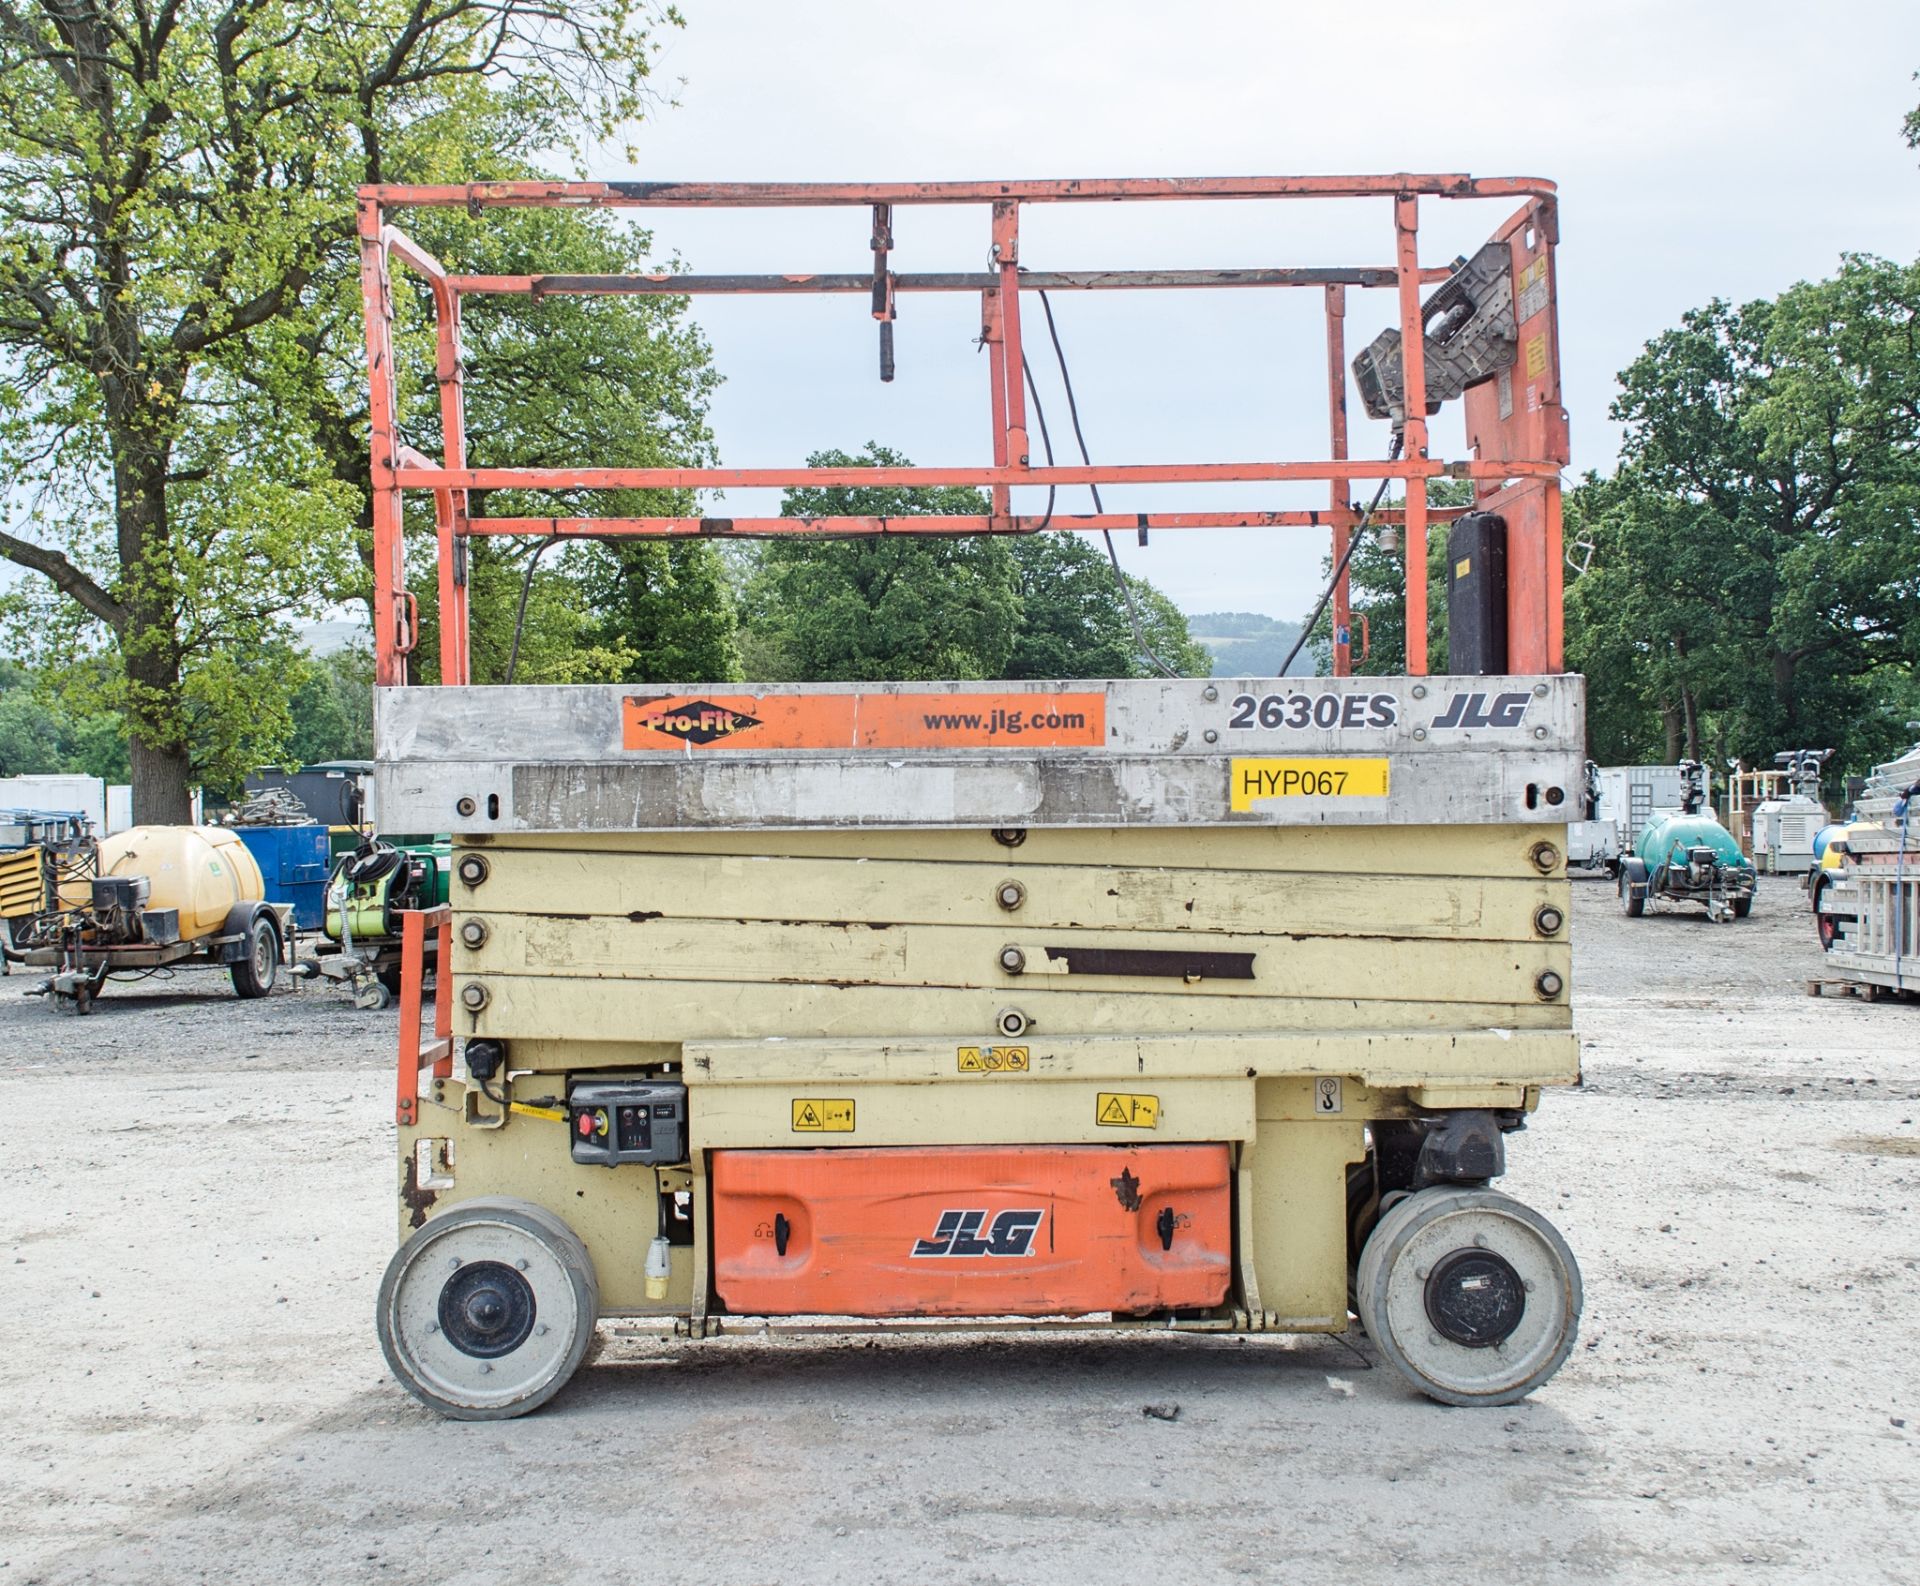 JLG 2630 ES battery electric scissor lift Year: 2006 S/N: 1200011002 Recorded hours: 355 HYP067 - Image 5 of 12